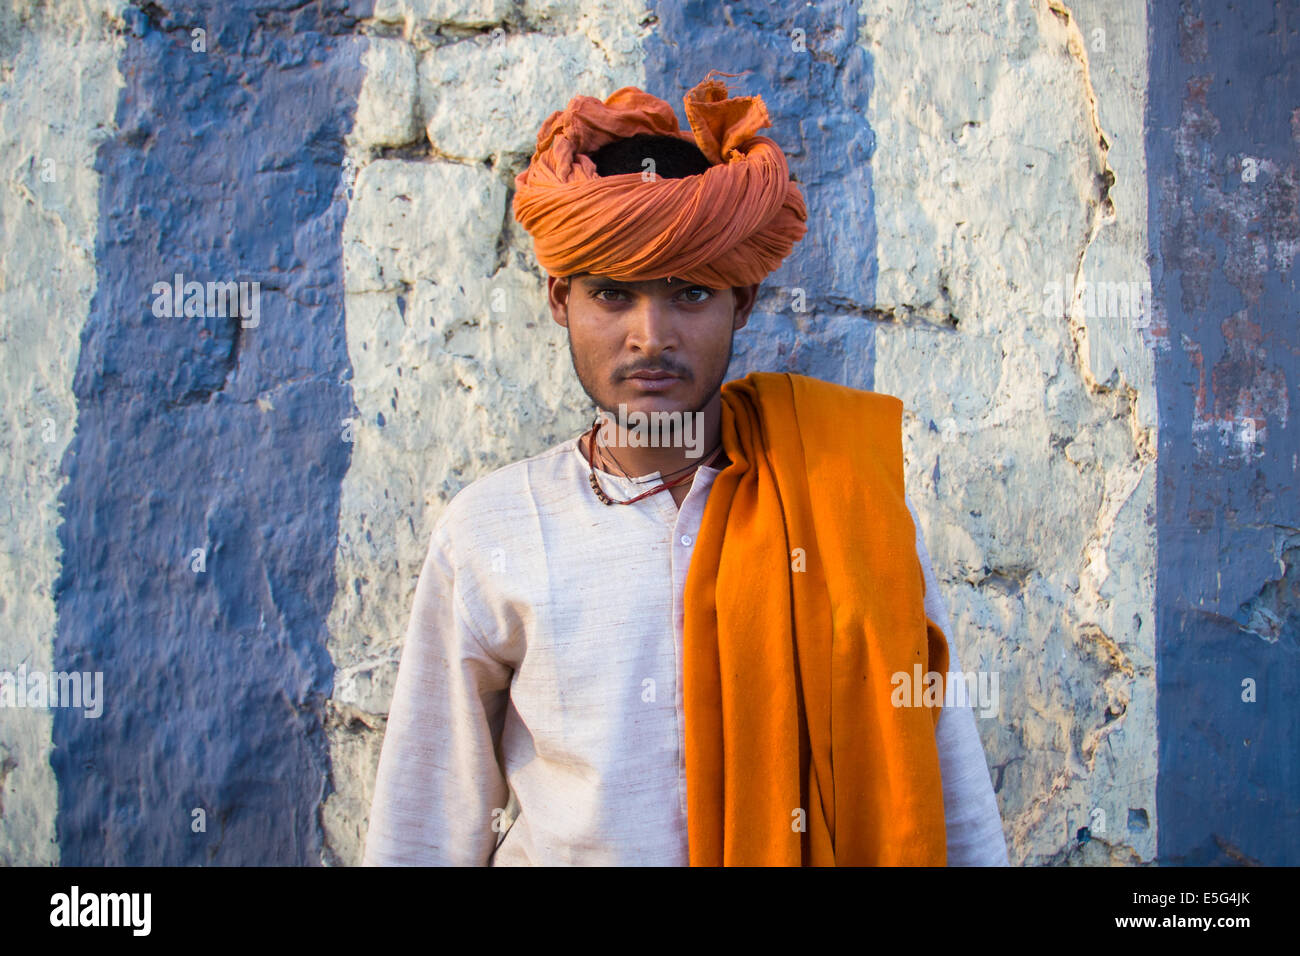 Young colorful hindu man, wearing an orange turban, posing before a striped wall in the old part of New Delhi, capital of India. Stock Photo